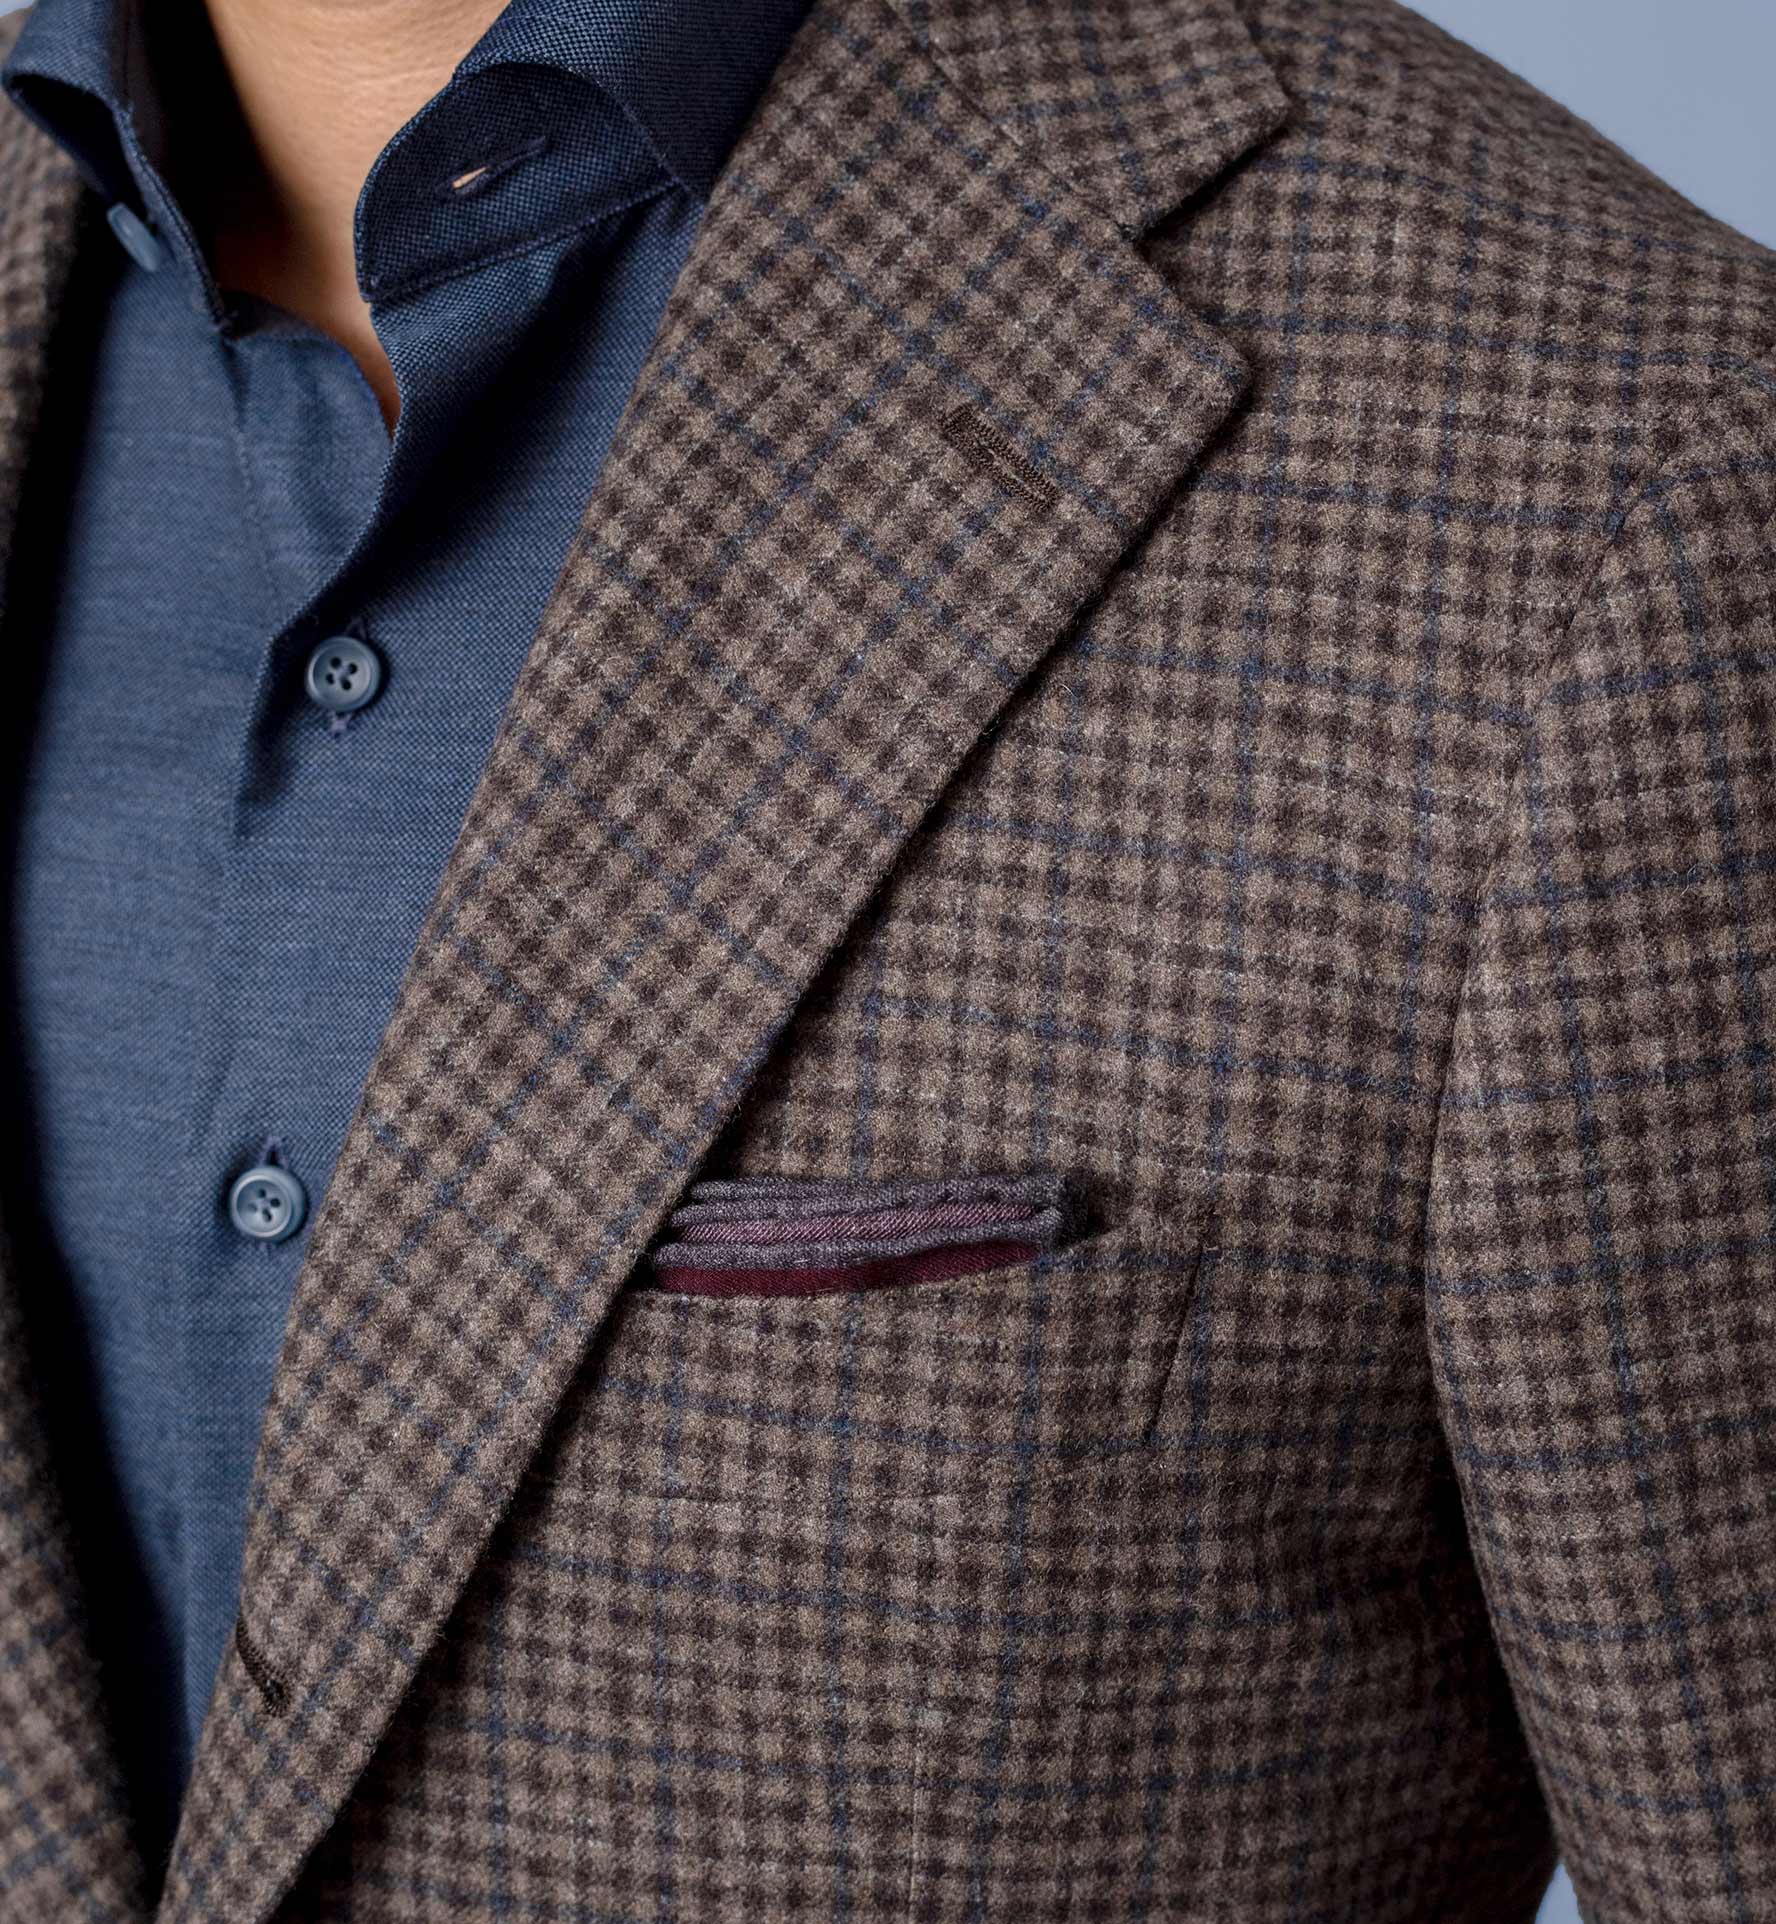 Bedford Brown Gun Check Jacket - Custom Fit Tailored Clothing